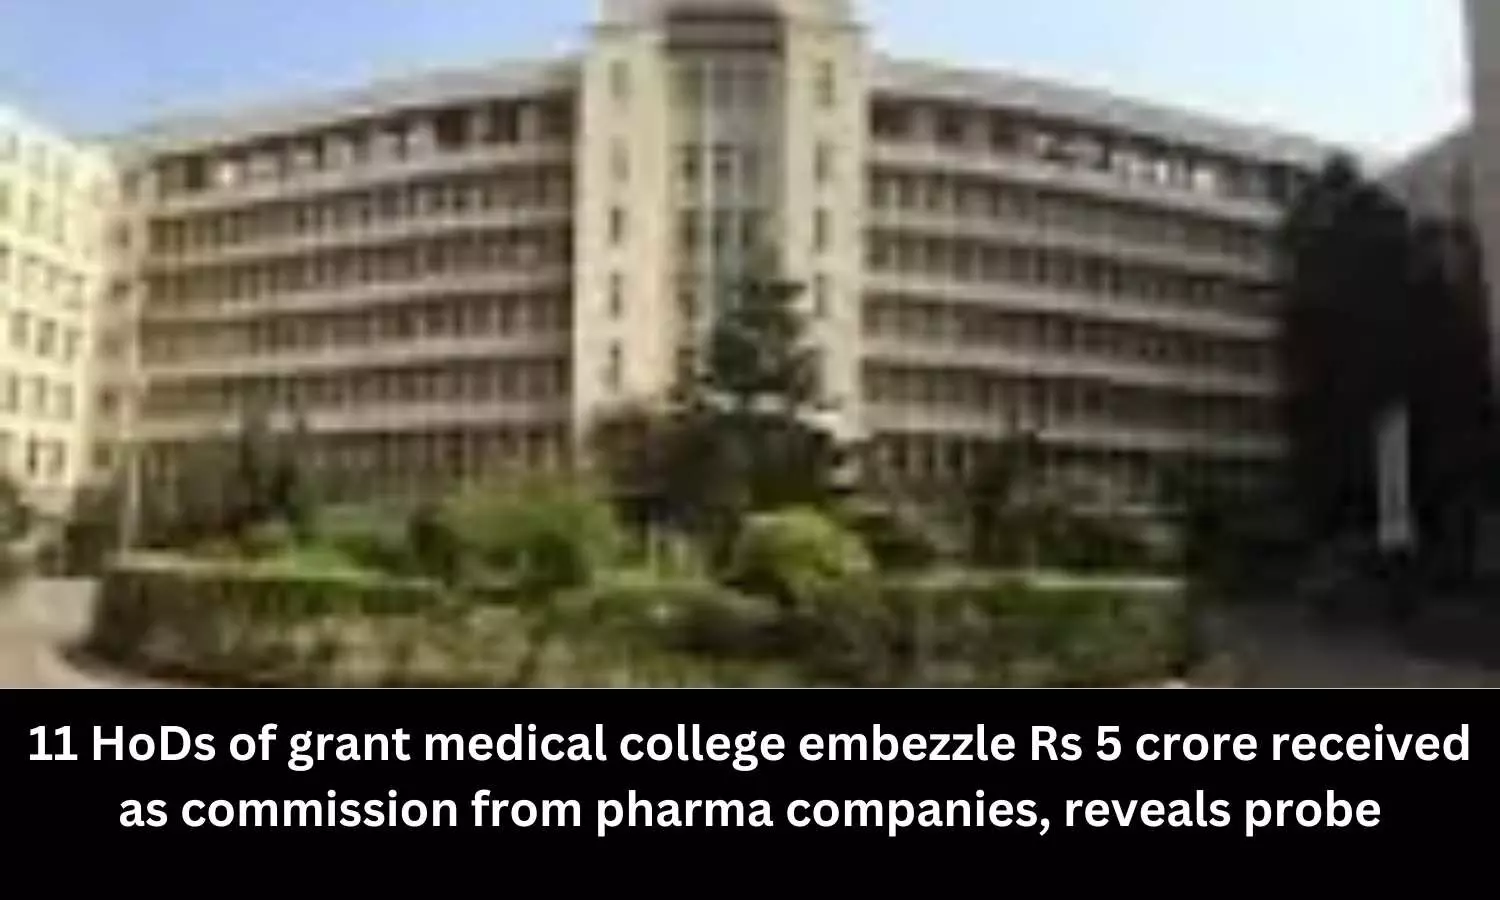 11 HoDs of Grant Medical College misappropriate Rs 5 crore funds over foreign tours, personal use